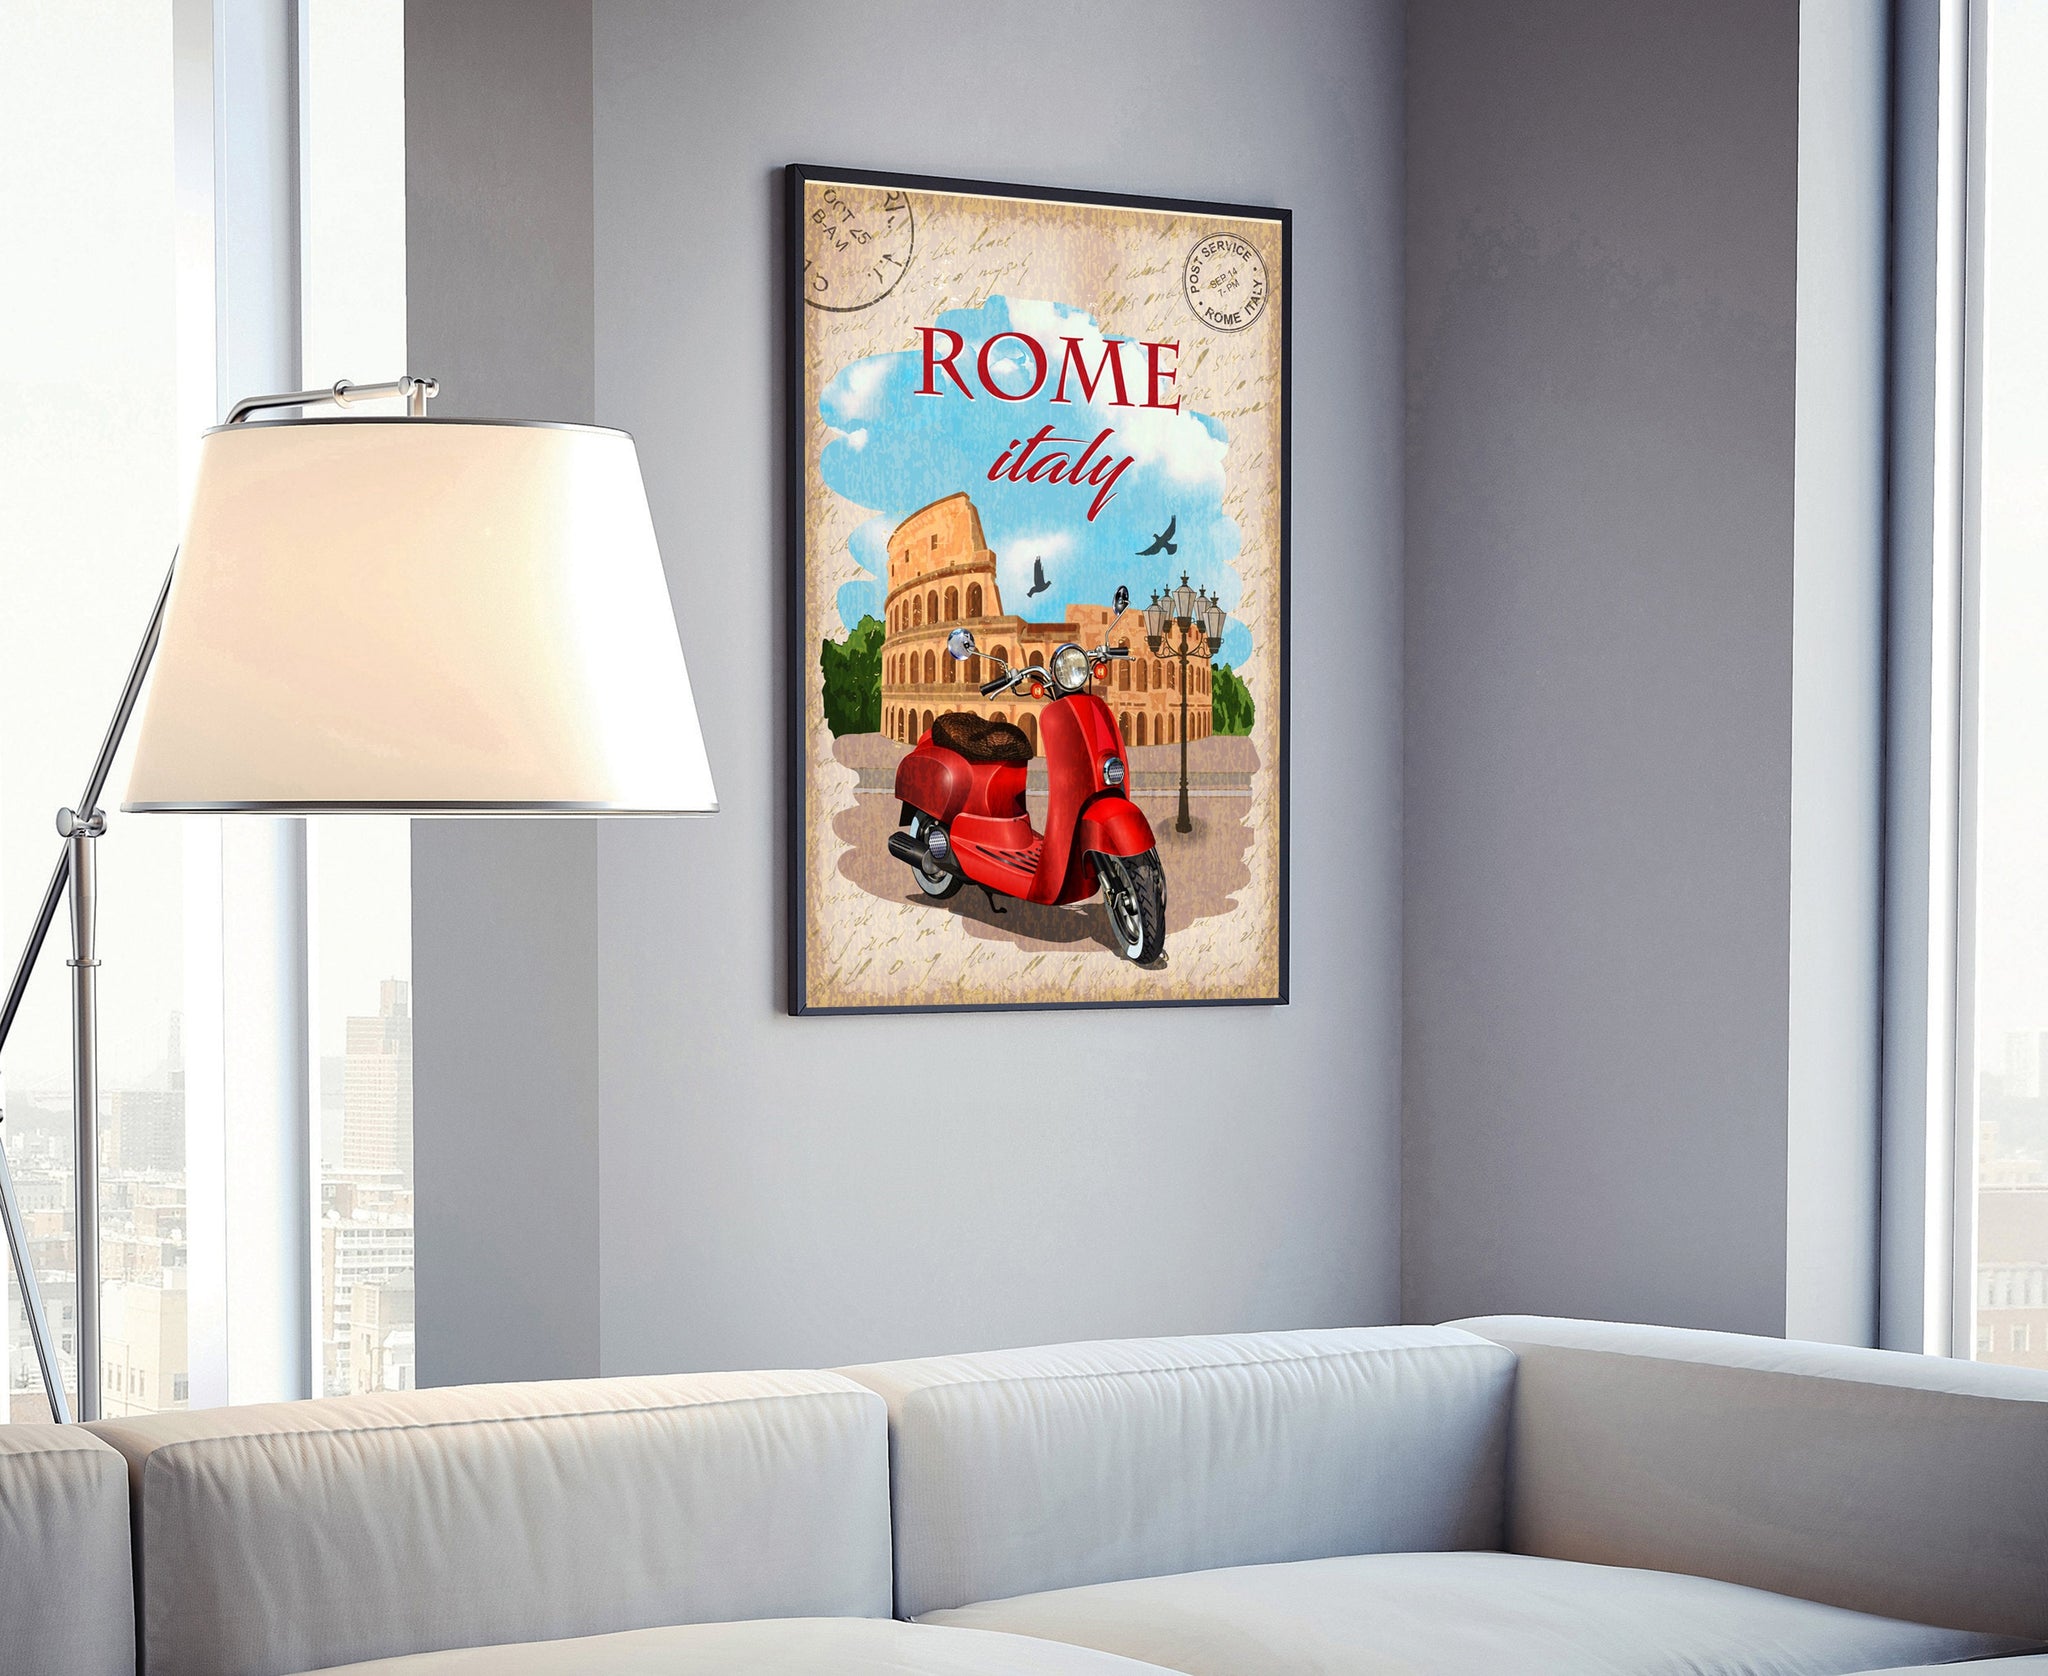 ITALY ROME travel poster, Rome cityscape poster artwork, Italy Rome landmark poster wall art, Home wall art, Office wall decoration